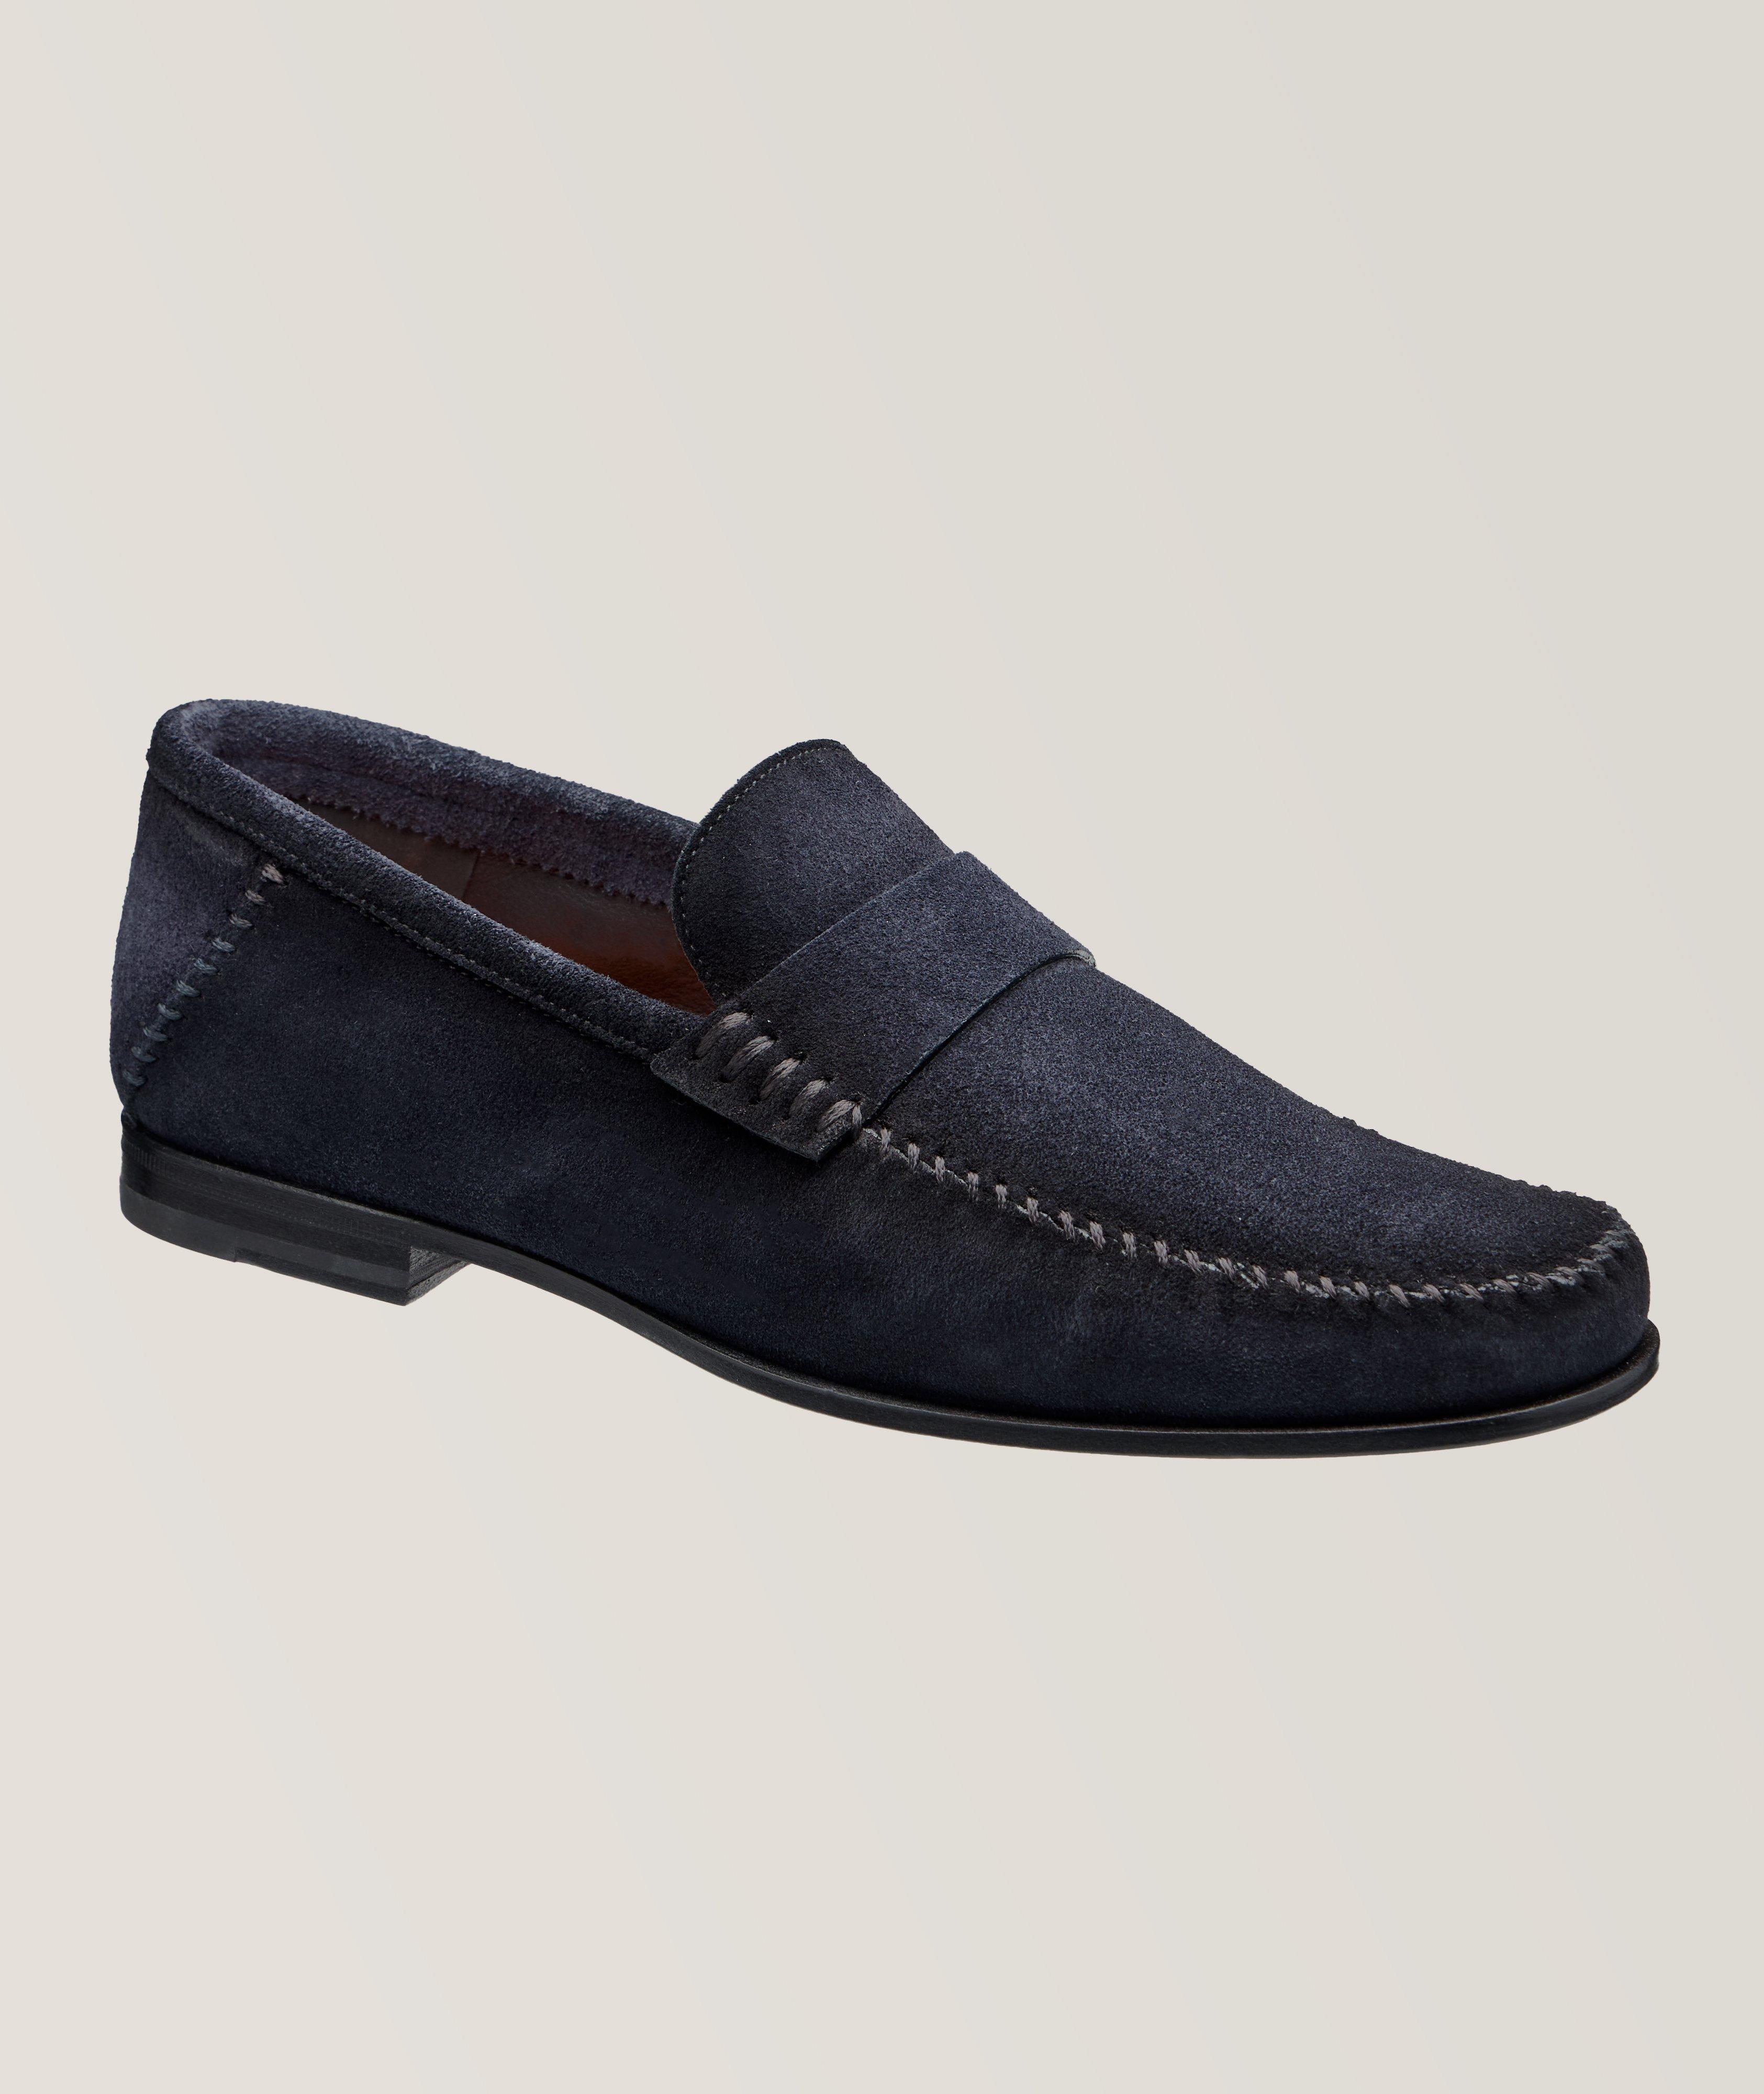 Santoni Paine Suede Leather Banded Loafers